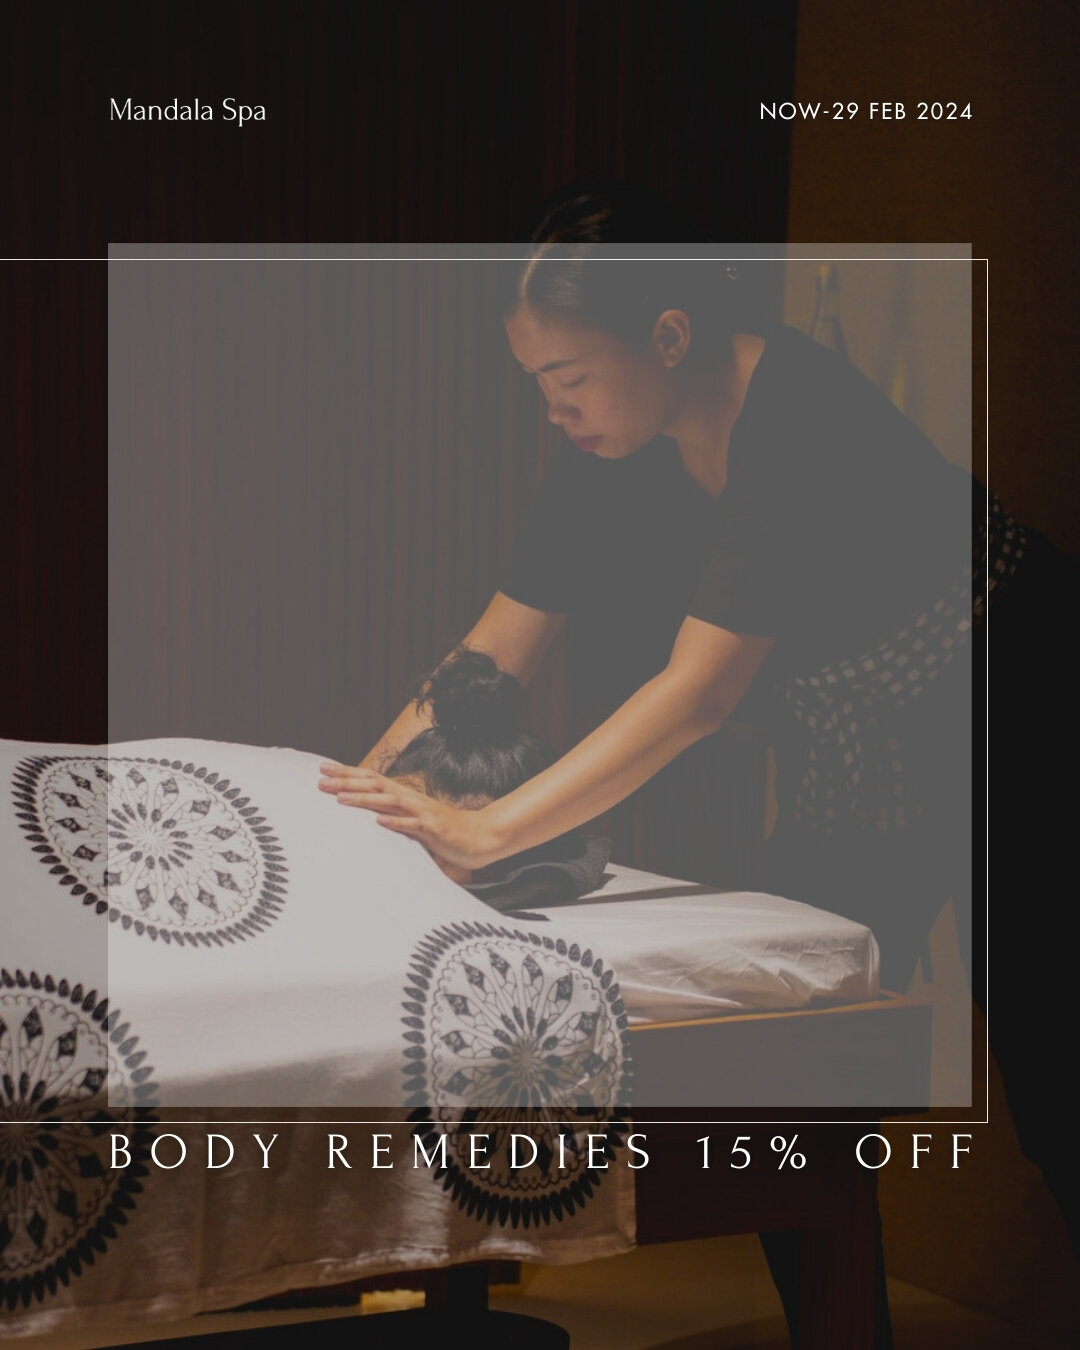 A reminder to treat yourself to a heavenly escape with our rejuvenating body massages &ndash; now 15% off until February 29th! 🌿💆&zwj;♂️ #BlissfulEscape

Open 9 am to 8 pm daily
Call to book at +623619088888
Chat to book at +6281907229888
www.manda